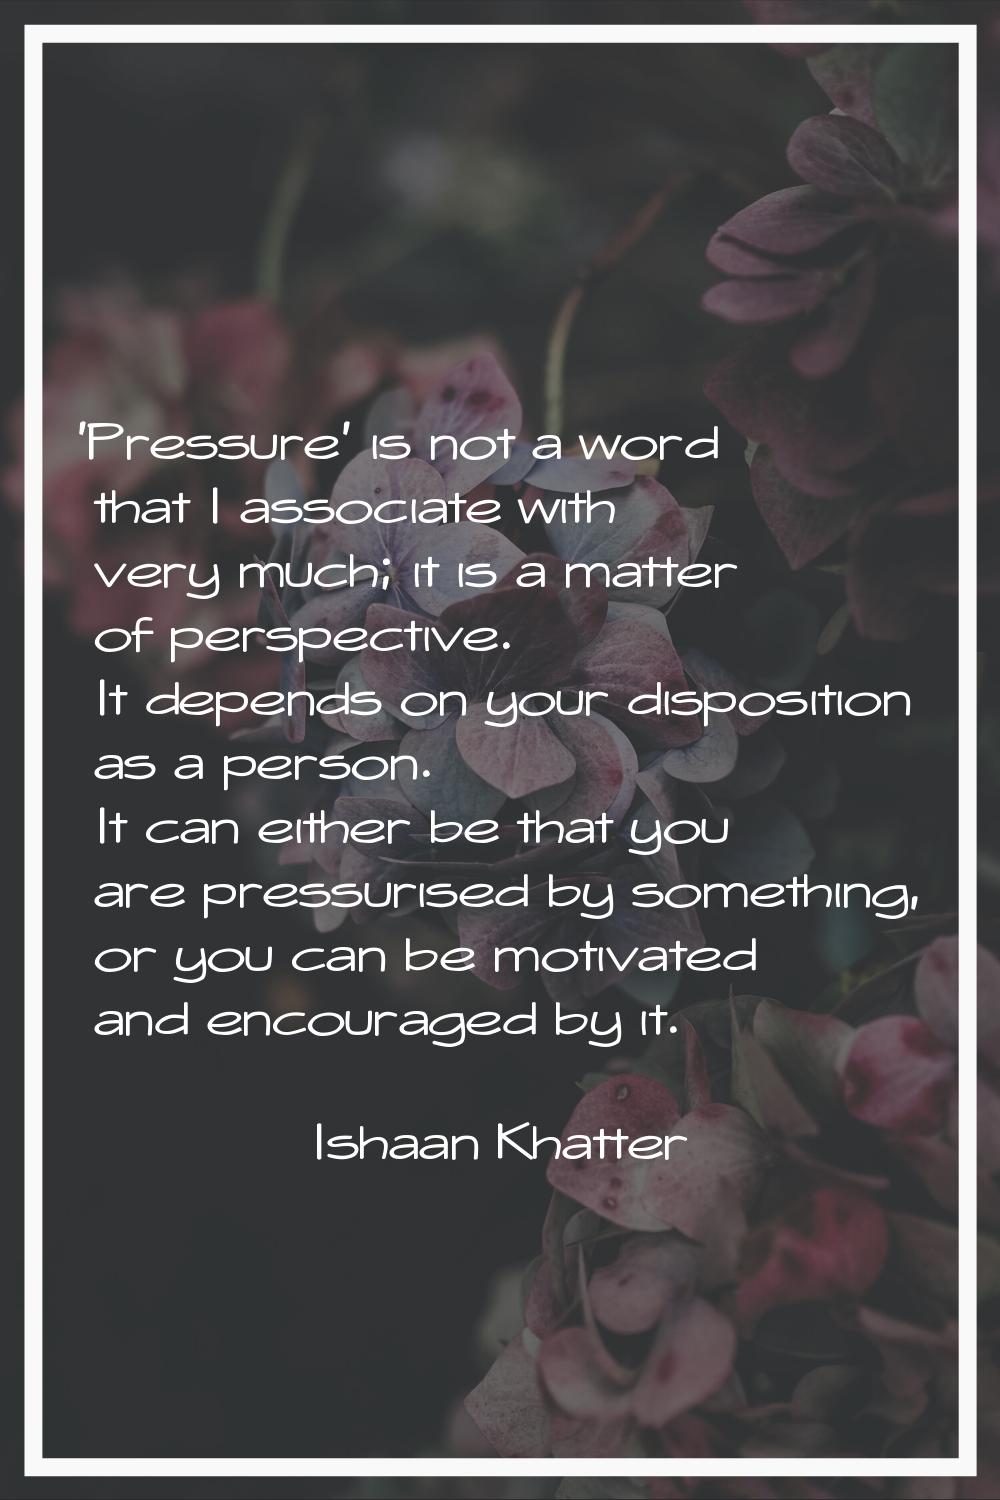 'Pressure' is not a word that I associate with very much; it is a matter of perspective. It depends